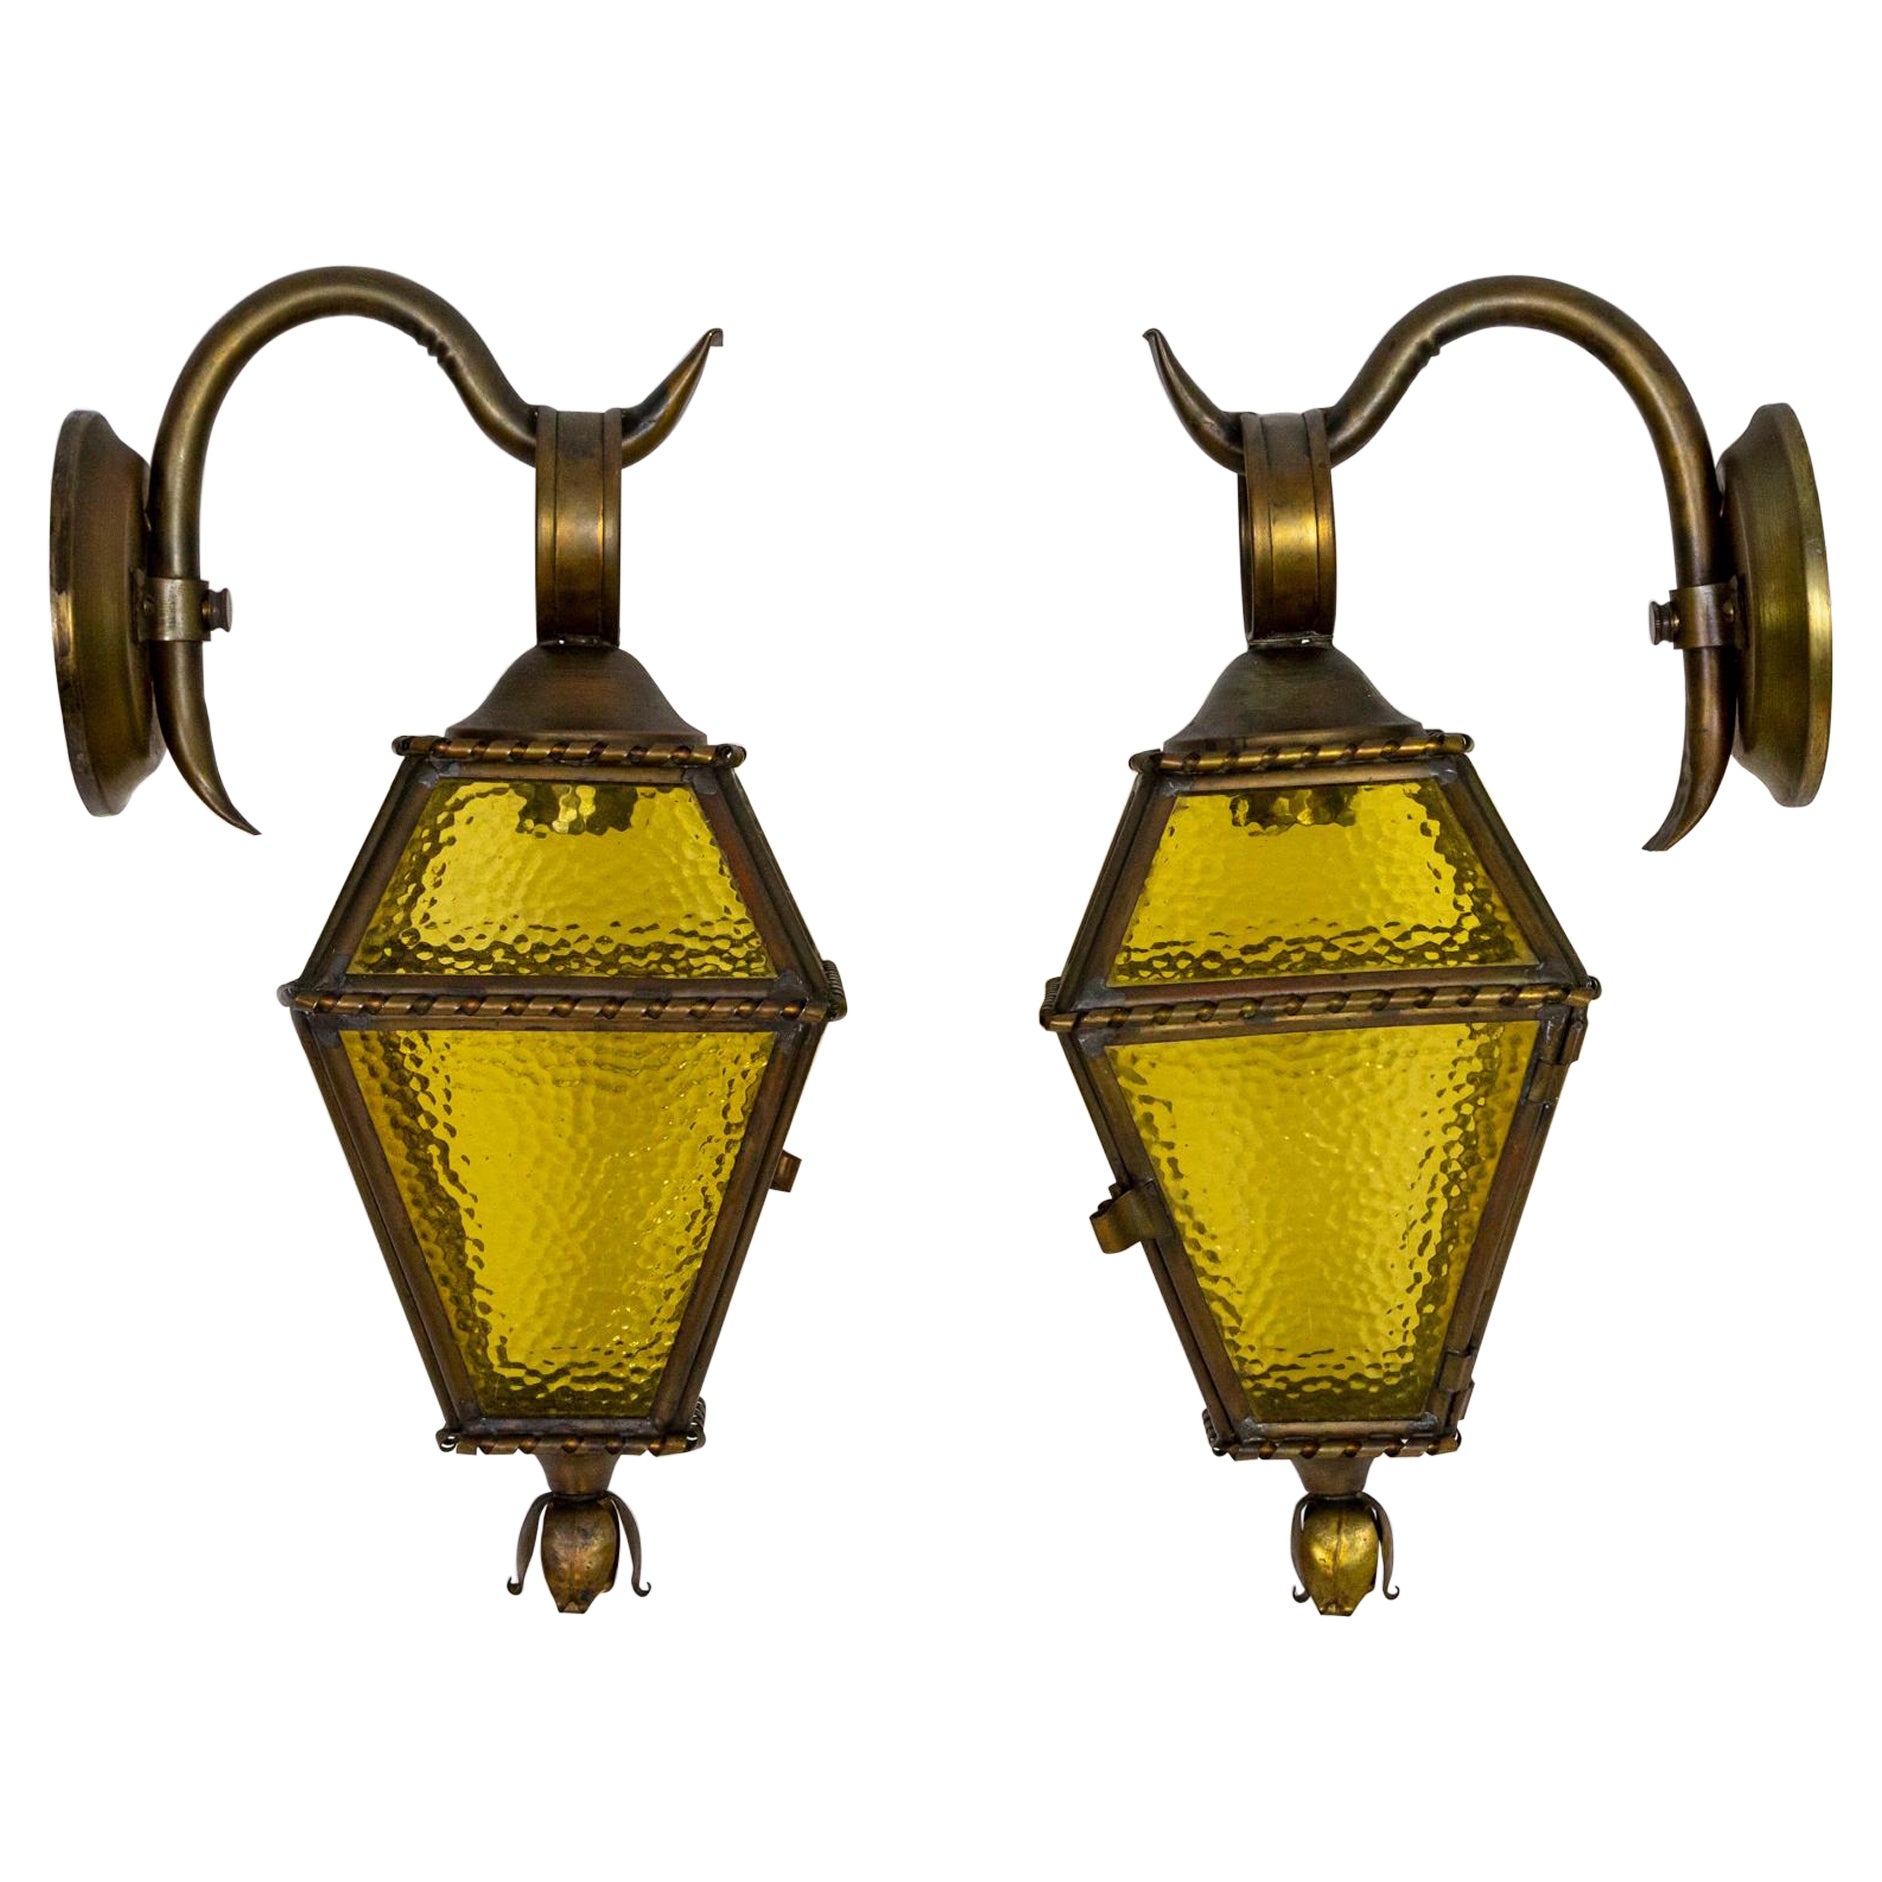 1920s Copper, Brass & Amber Glass Scroll Arm Sconces, 'Pair' (3 sets available)